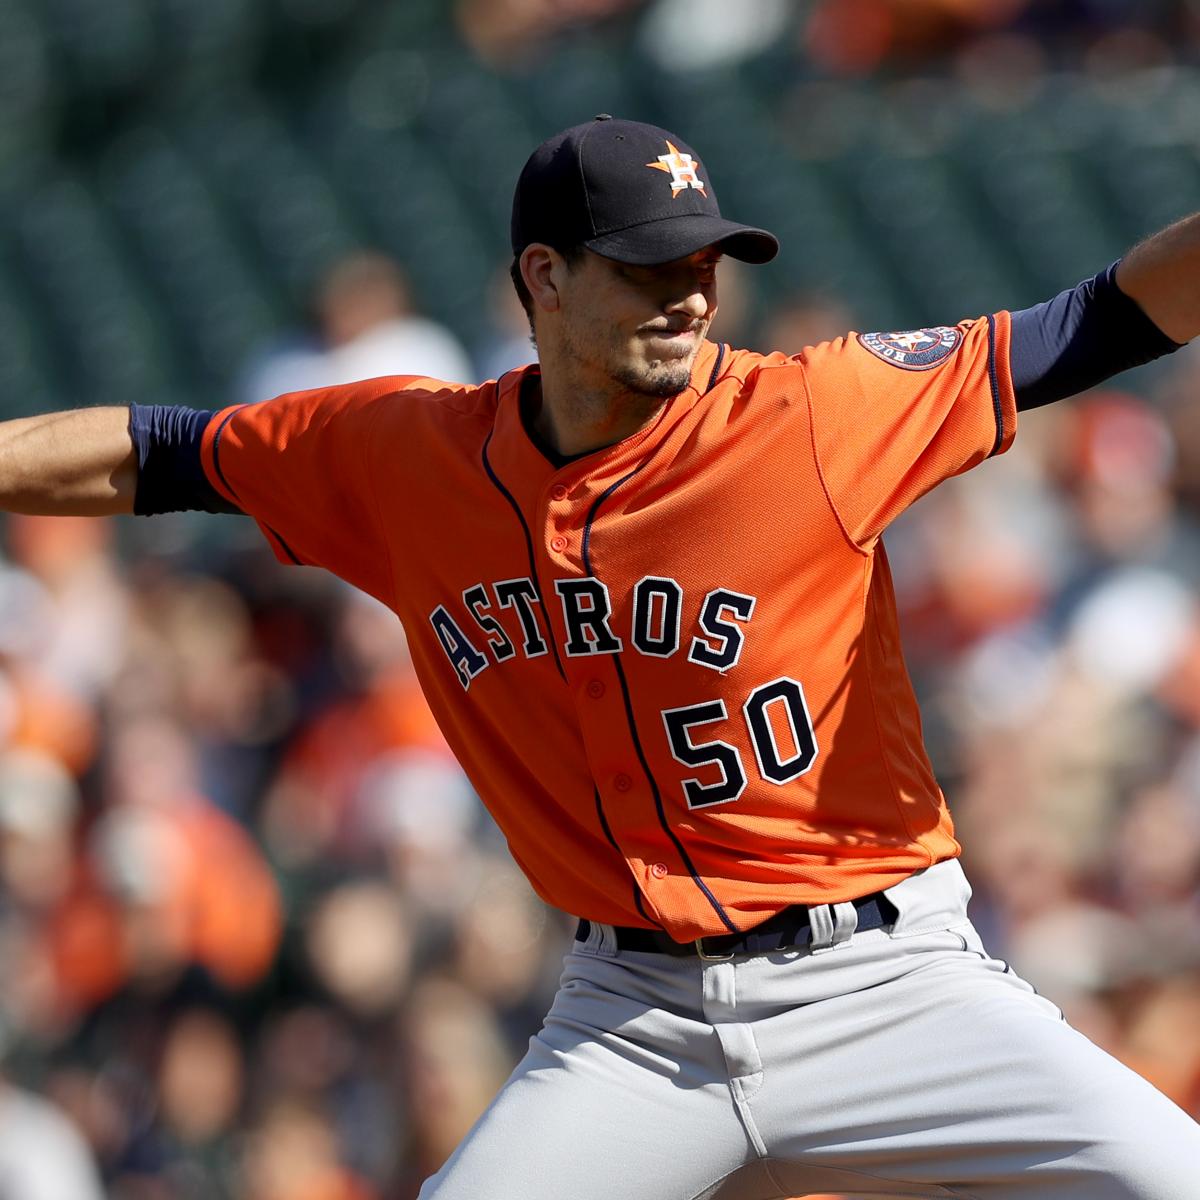 Charlie Morton faces old mates as Braves host Rays - Battery Power